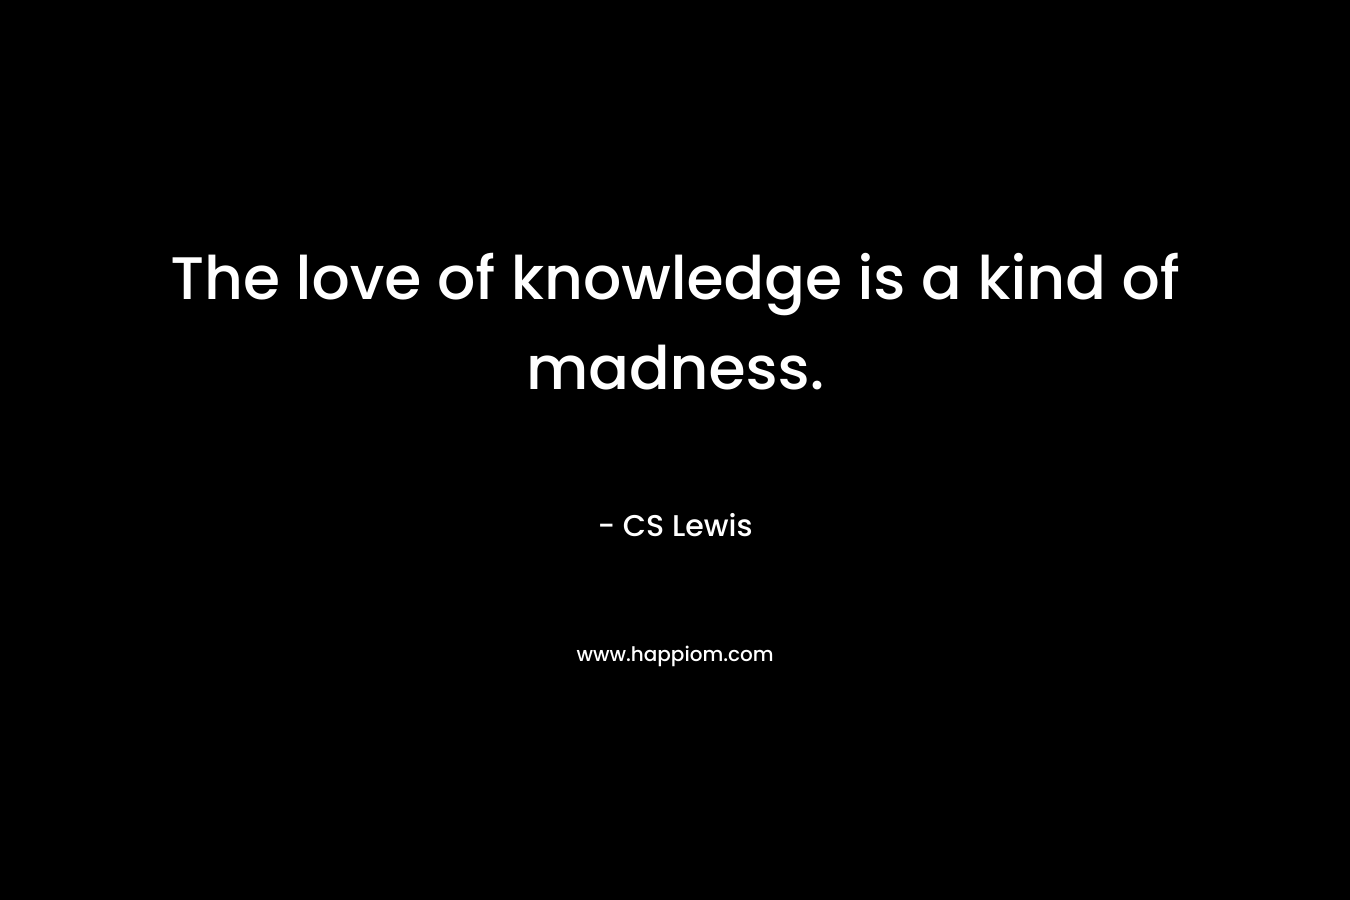 The love of knowledge is a kind of madness. – CS Lewis